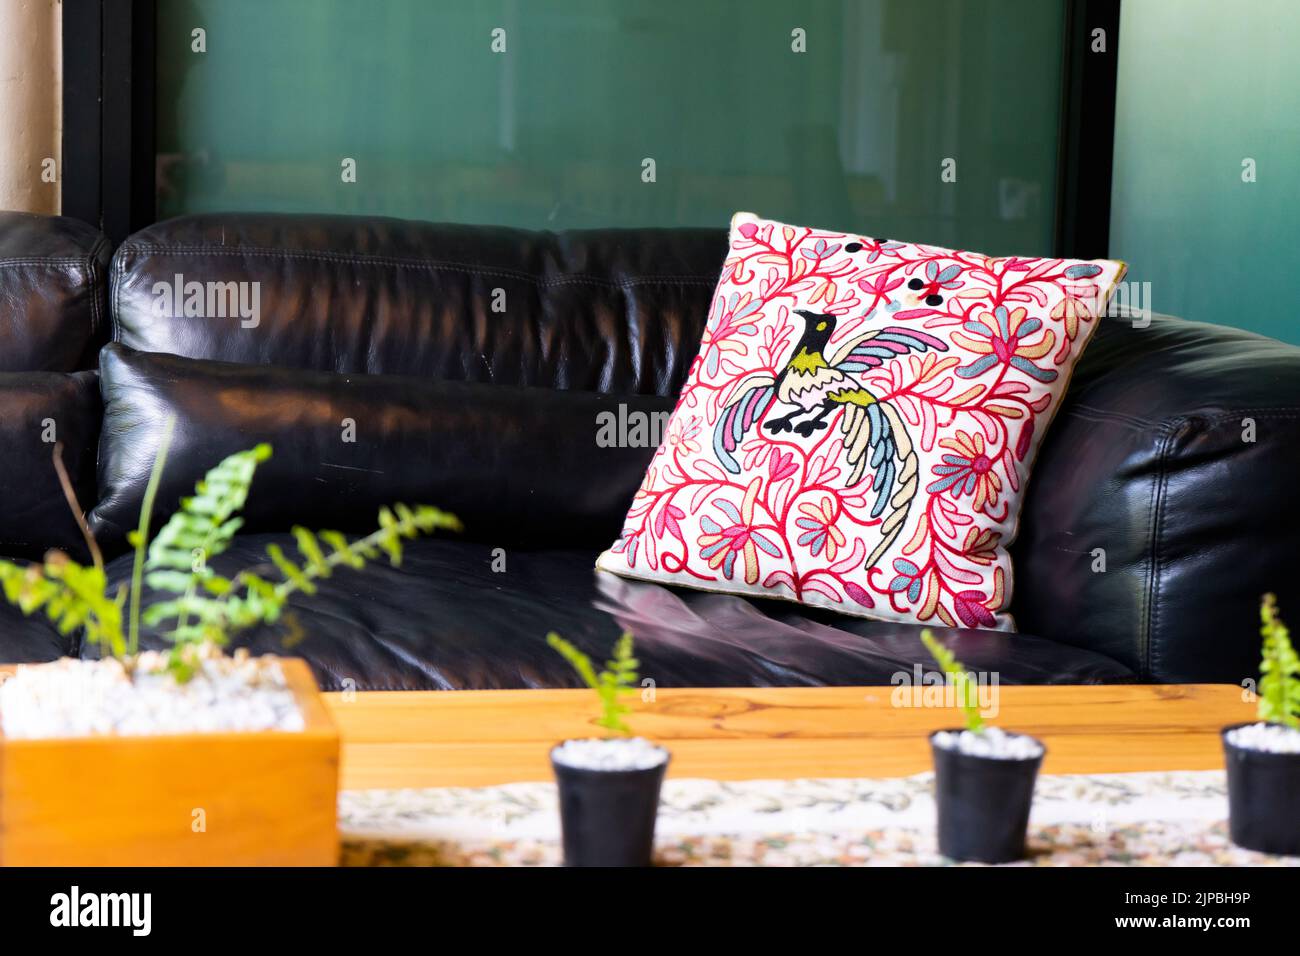 https://c8.alamy.com/comp/2JPBH9P/peacock-patterned-red-pillow-is-on-a-black-sofa-in-front-of-him-was-a-small-potted-plant-on-a-brown-wooden-table-2JPBH9P.jpg